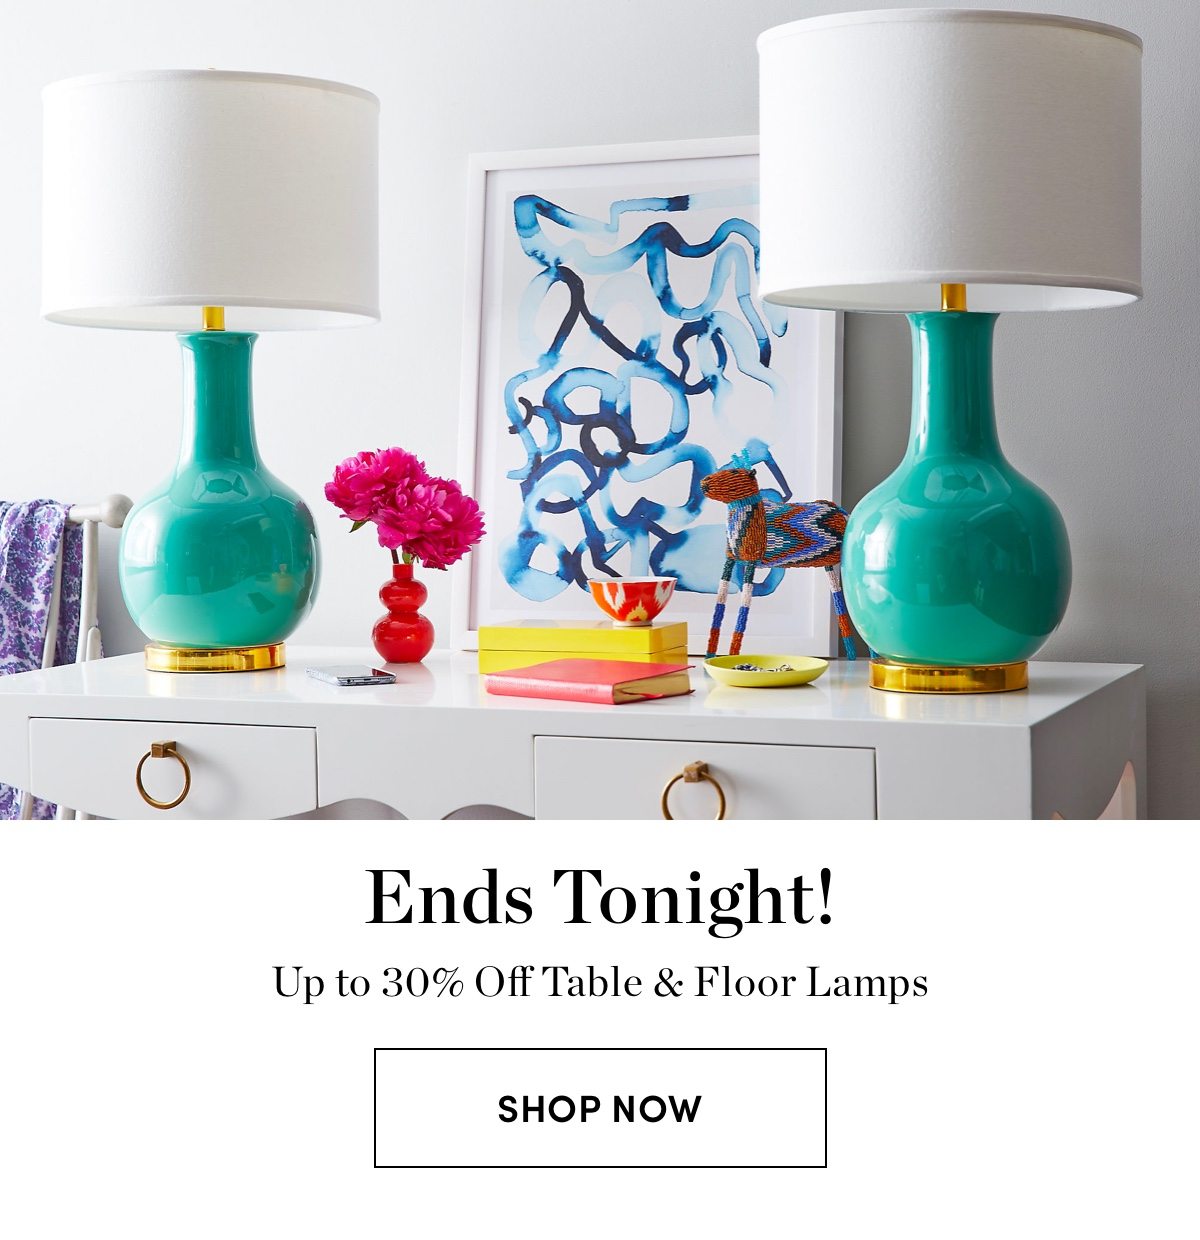 Up to 30% Off Table & Floor Lamps